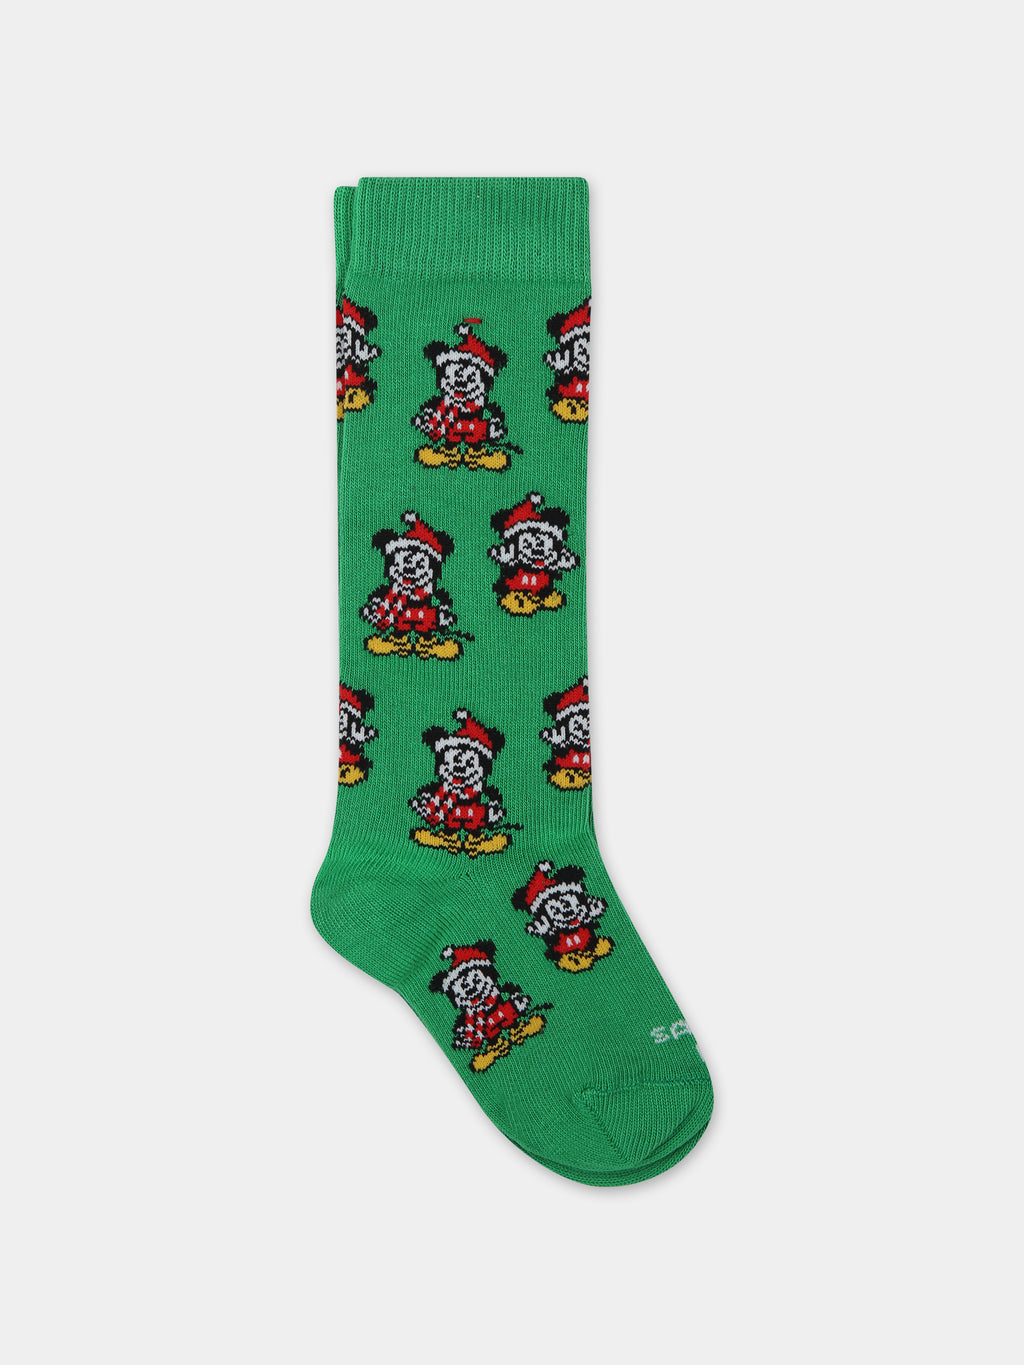 Green socks for boy with Micky Mouse